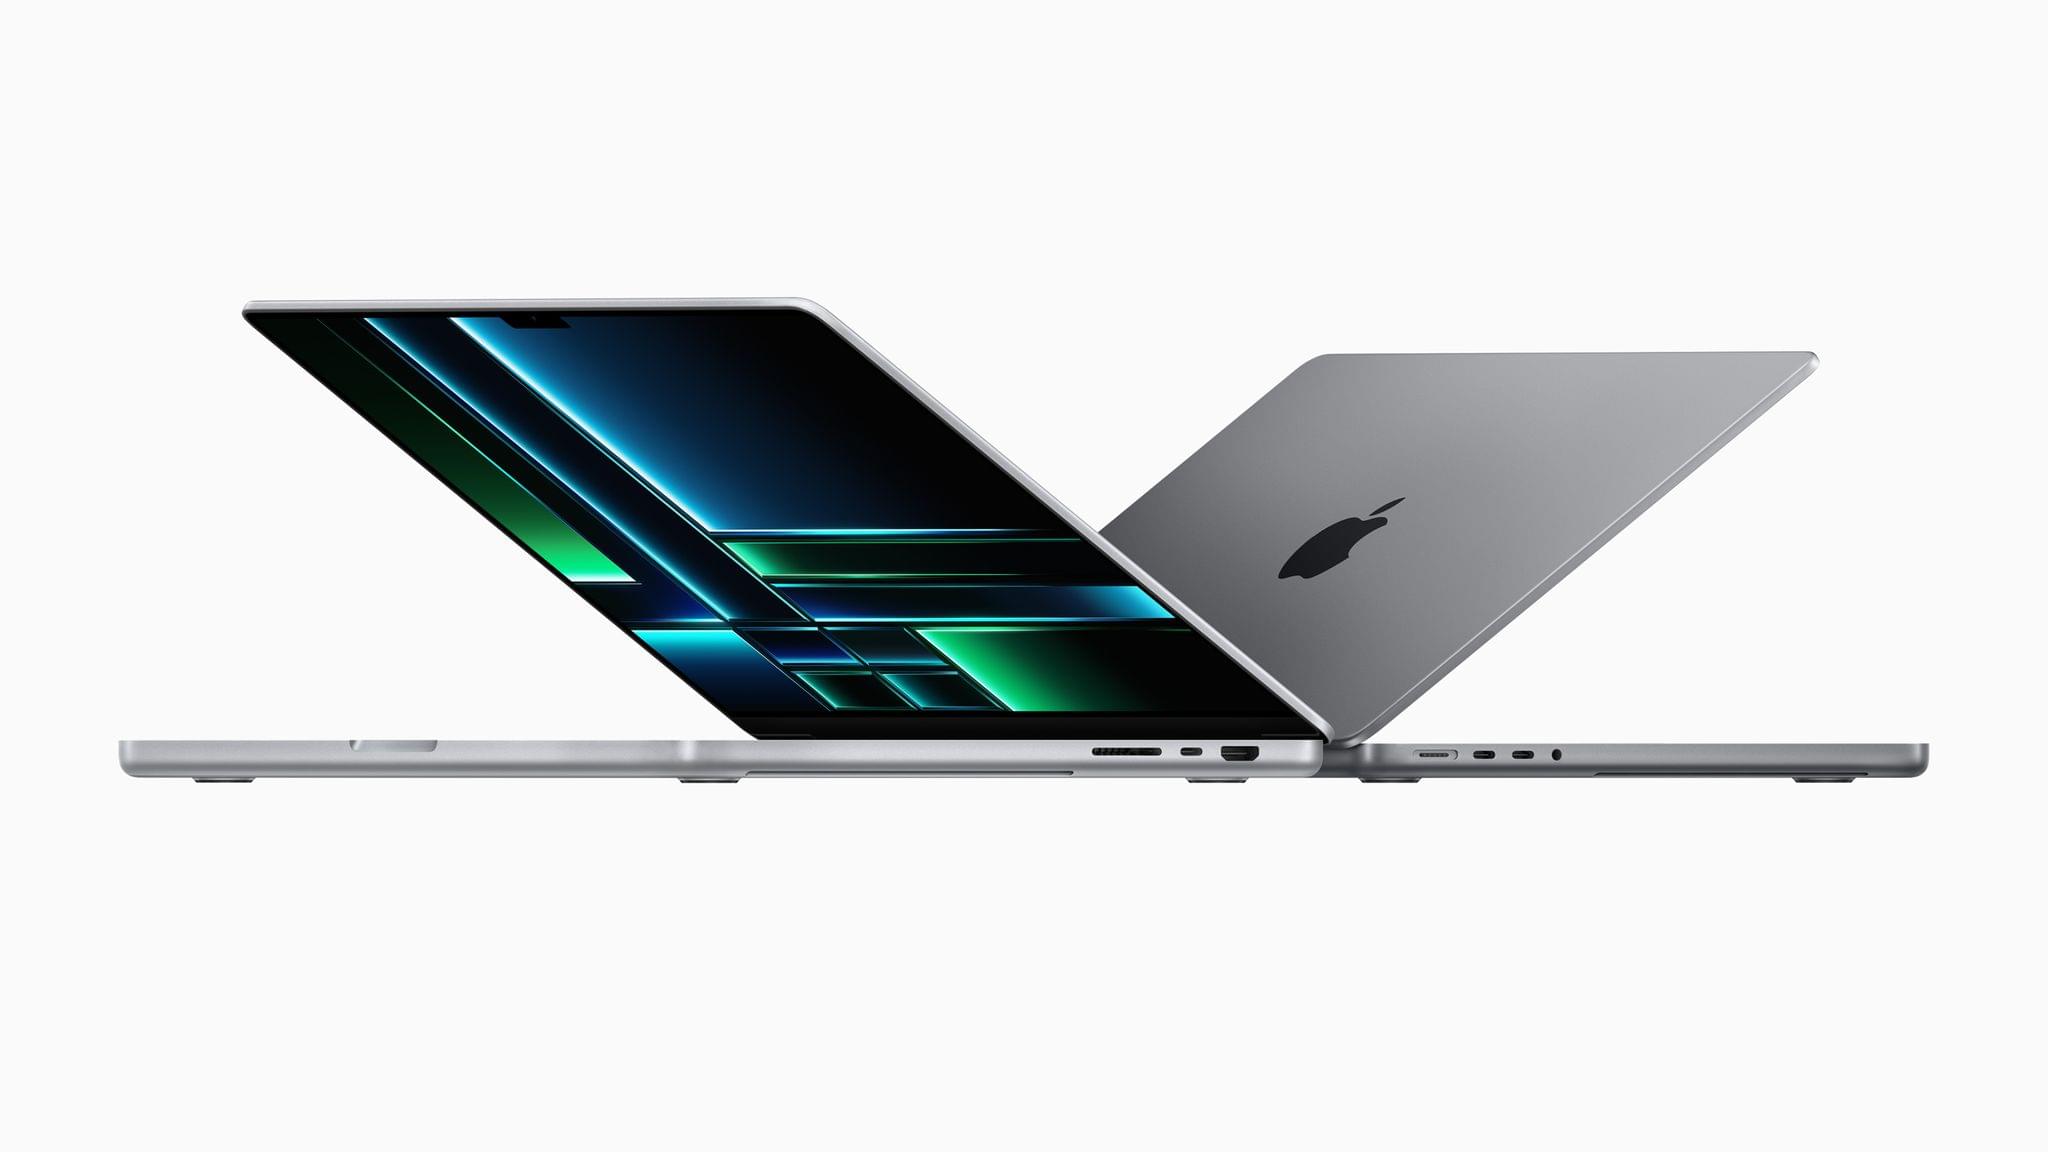 The M2 Max MacBook Pros have potential as gaming laptops if developers adapt their games for the system.